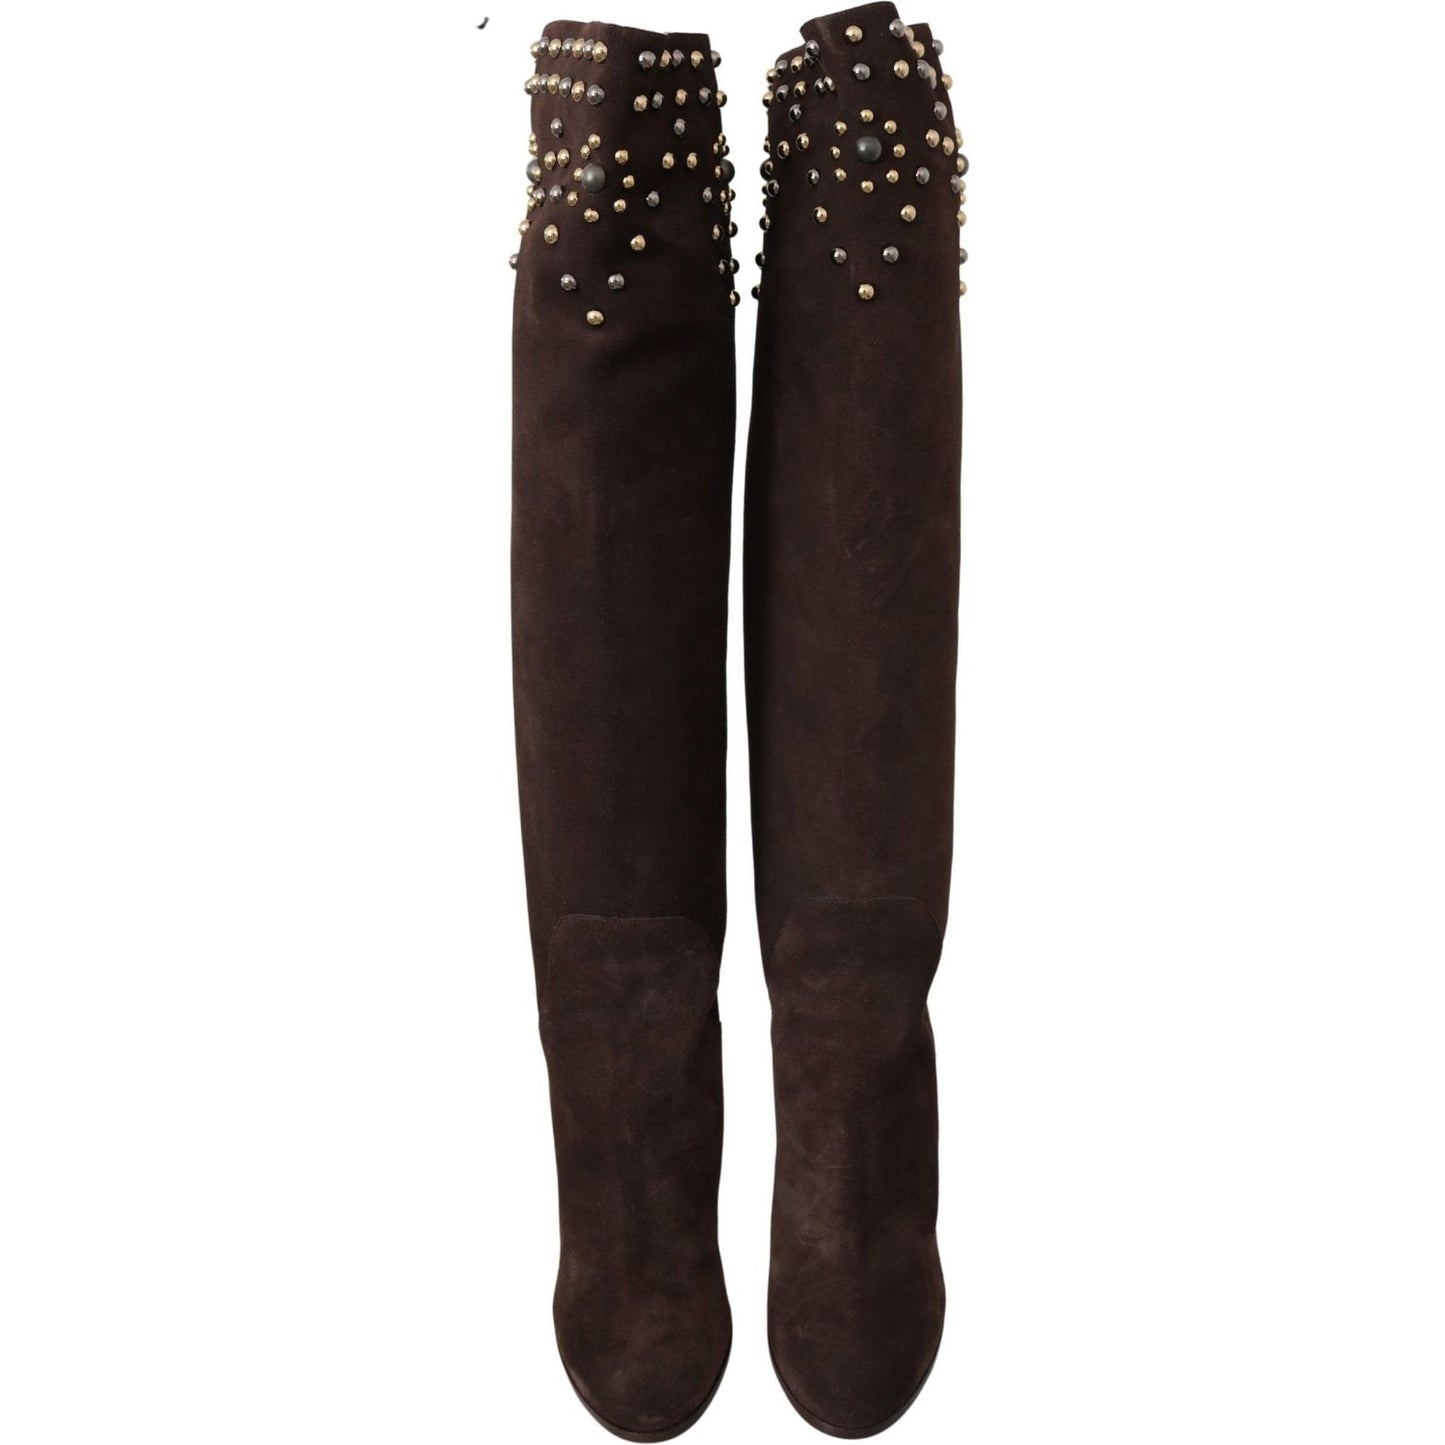 Dolce & Gabbana Studded Suede Knee High Boots in Brown brown-suede-studded-knee-high-shoes-boots IMG_1081-scaled-a067cf2b-6f1.jpg